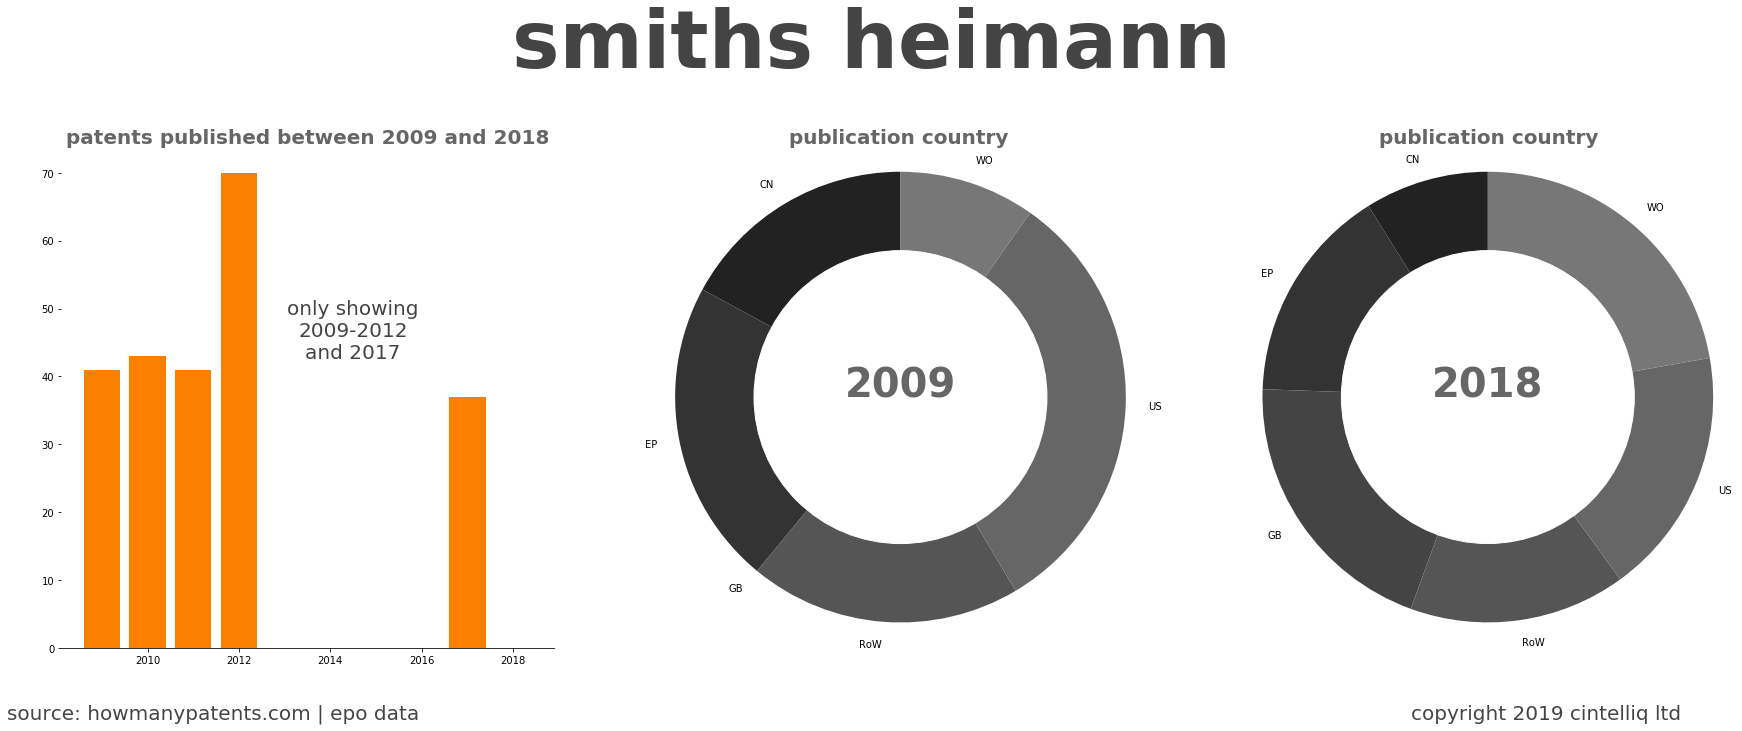 summary of patents for Smiths Heimann